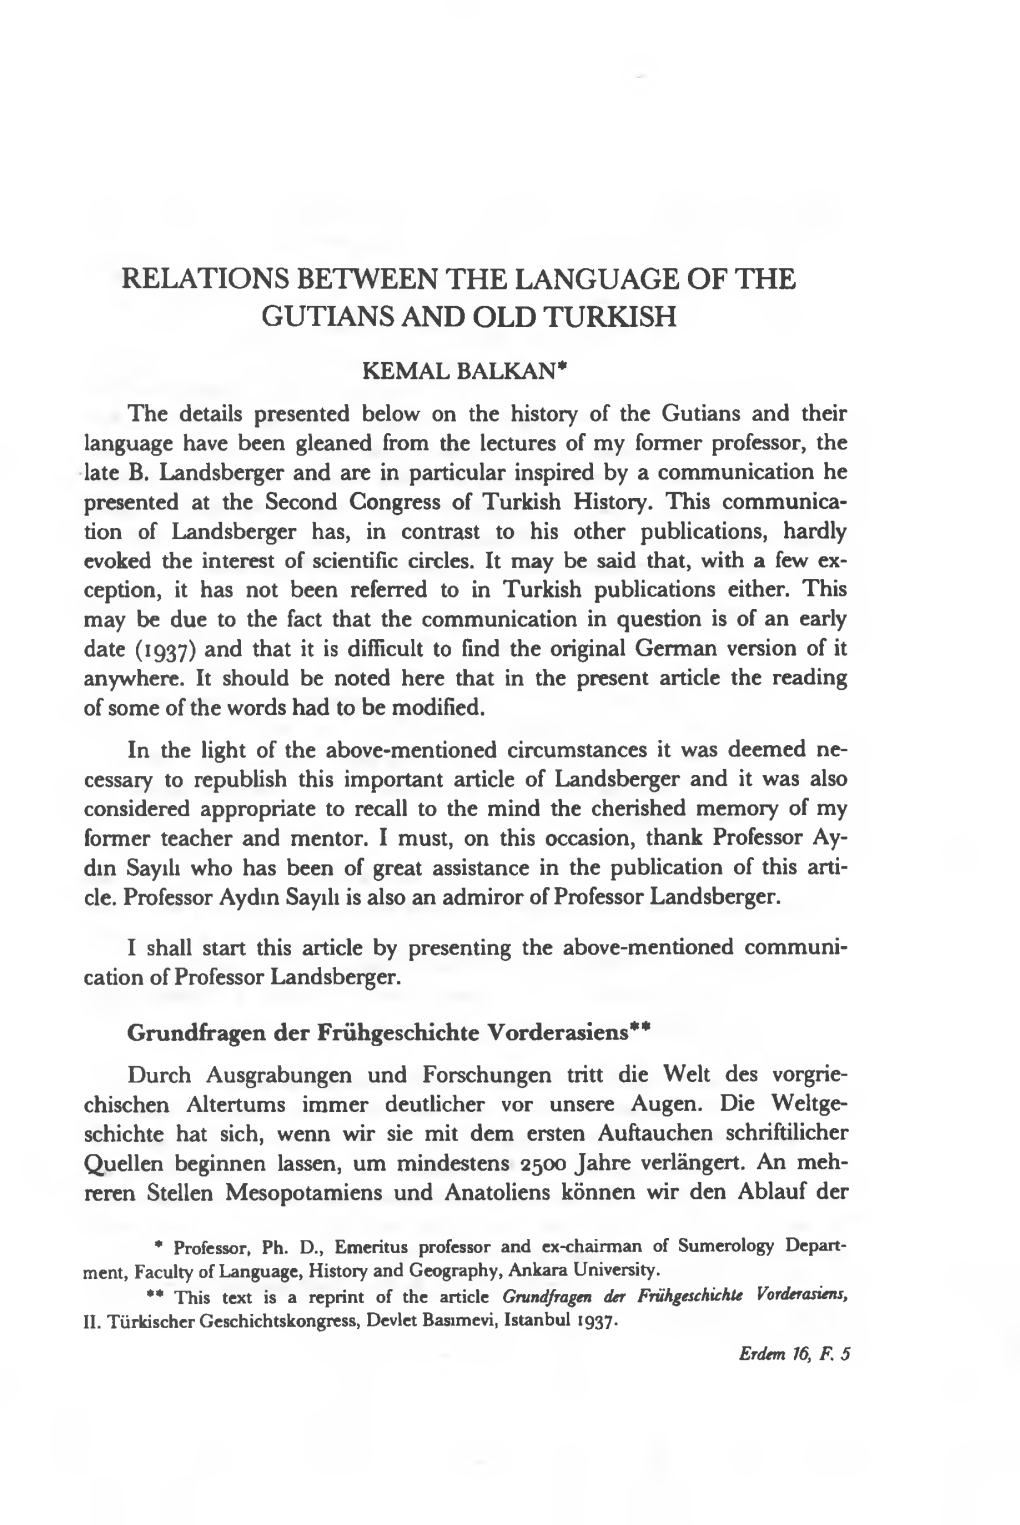 Relations Betyveen the Language of the Gutians and Old Turkish